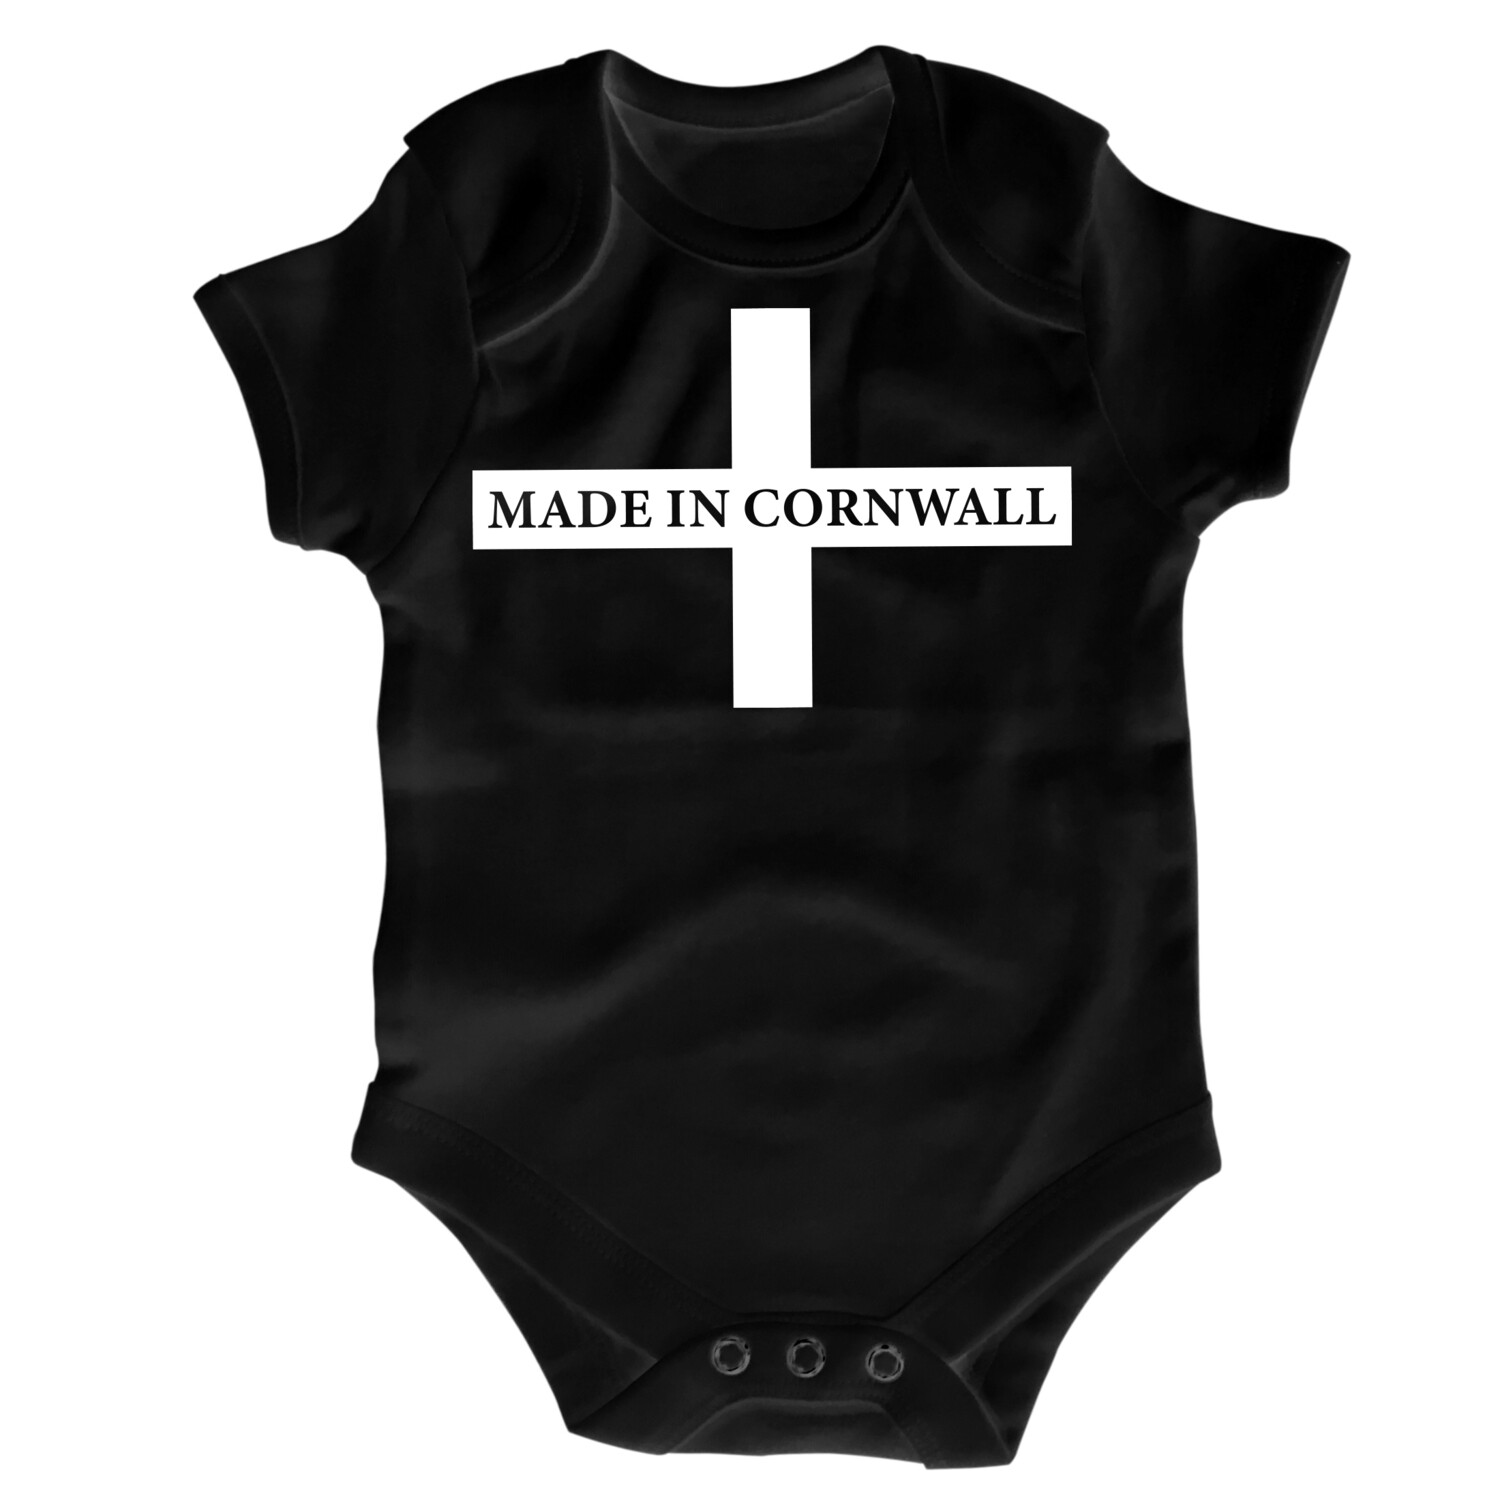 'Made in Cornwall' Baby Grow